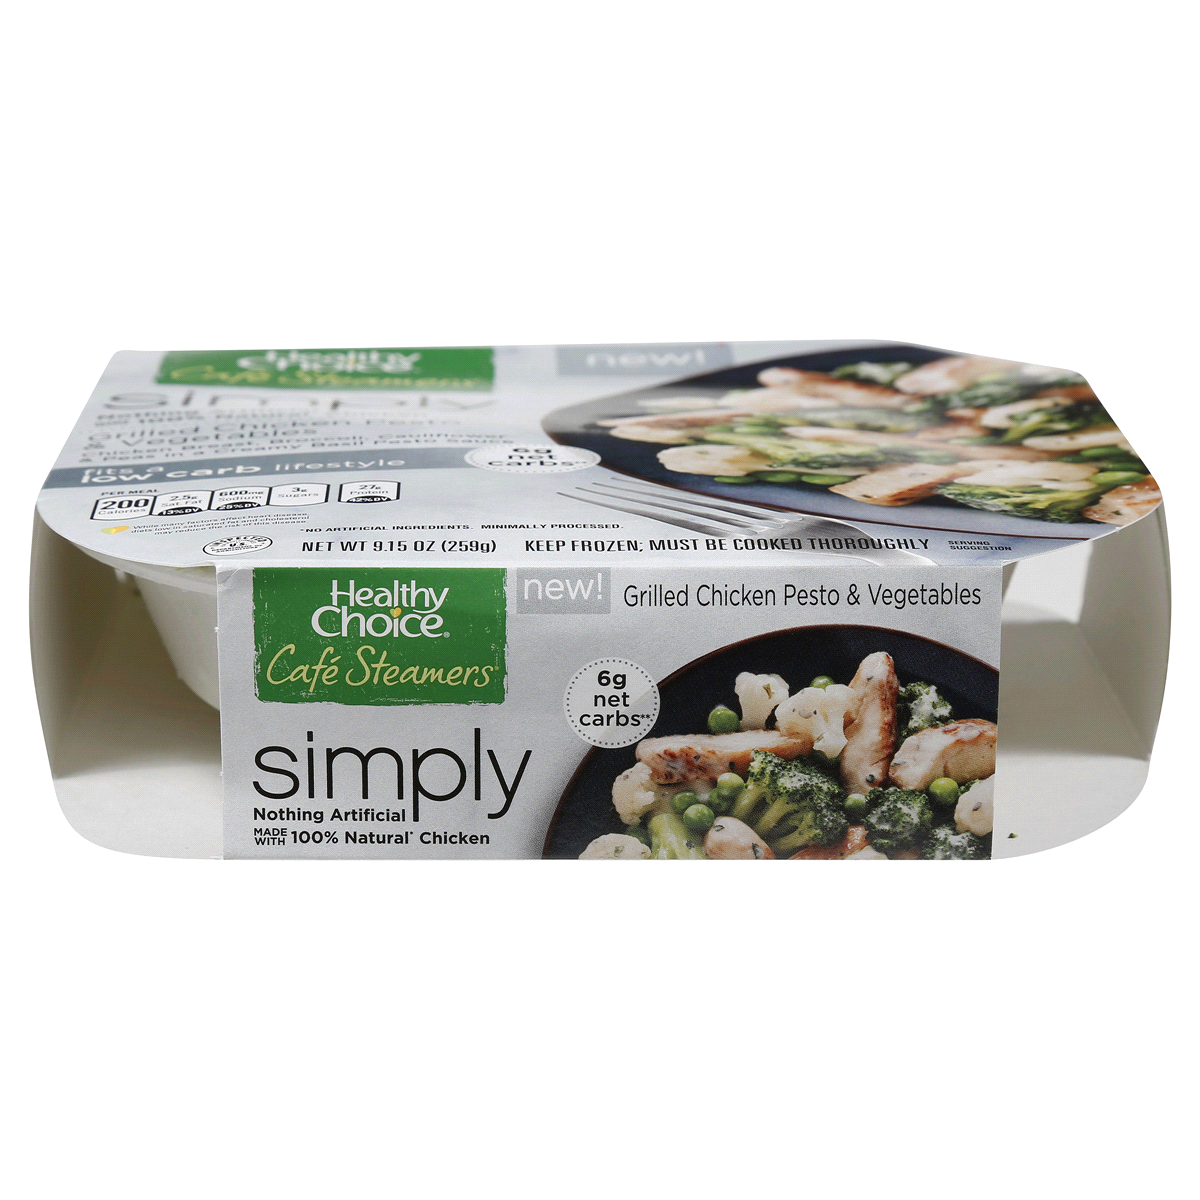 slide 6 of 6, Healthy Choice Cafe Steamers Simply Grilled Chicken Pesto Vegetables, 9.15 oz